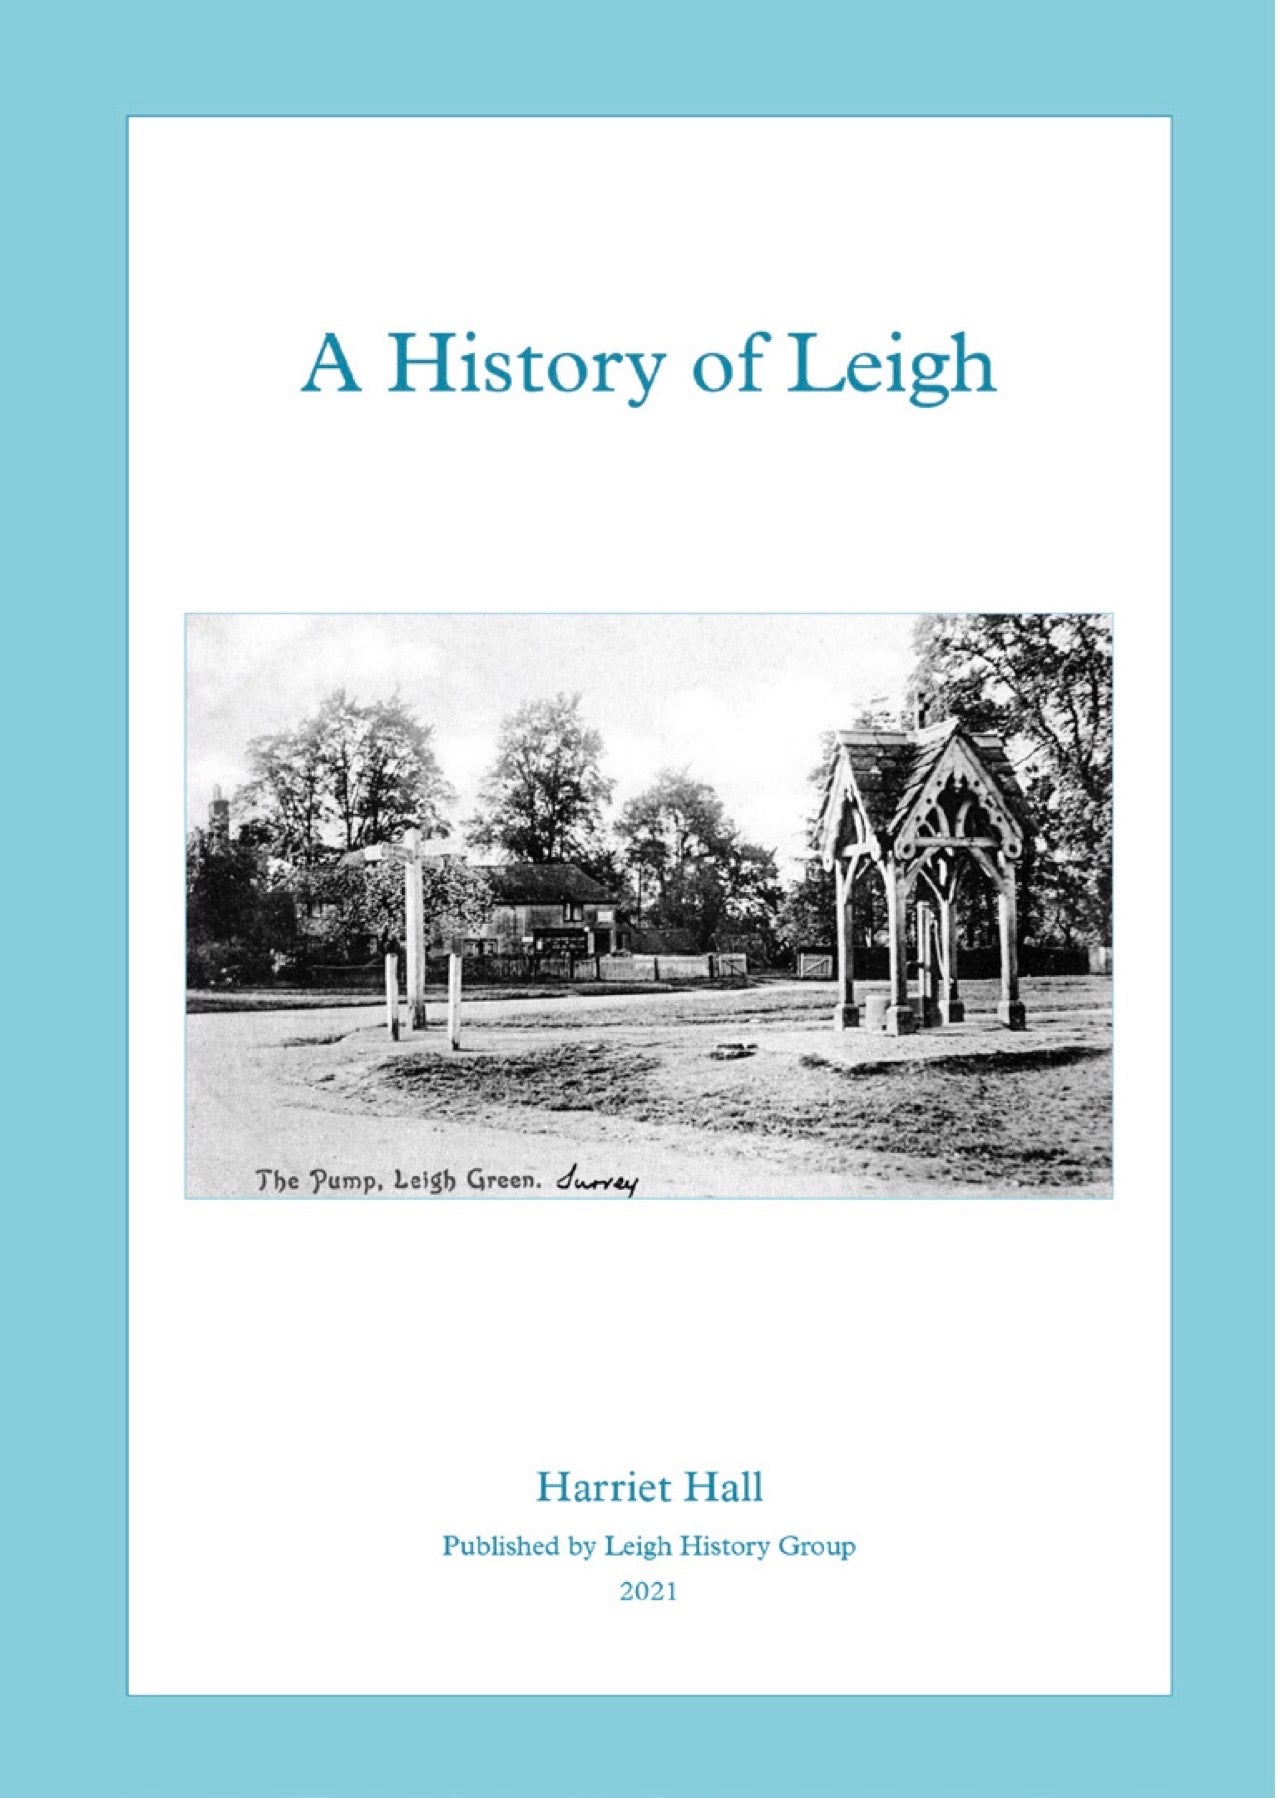 History of Leigh by Harriet Hall